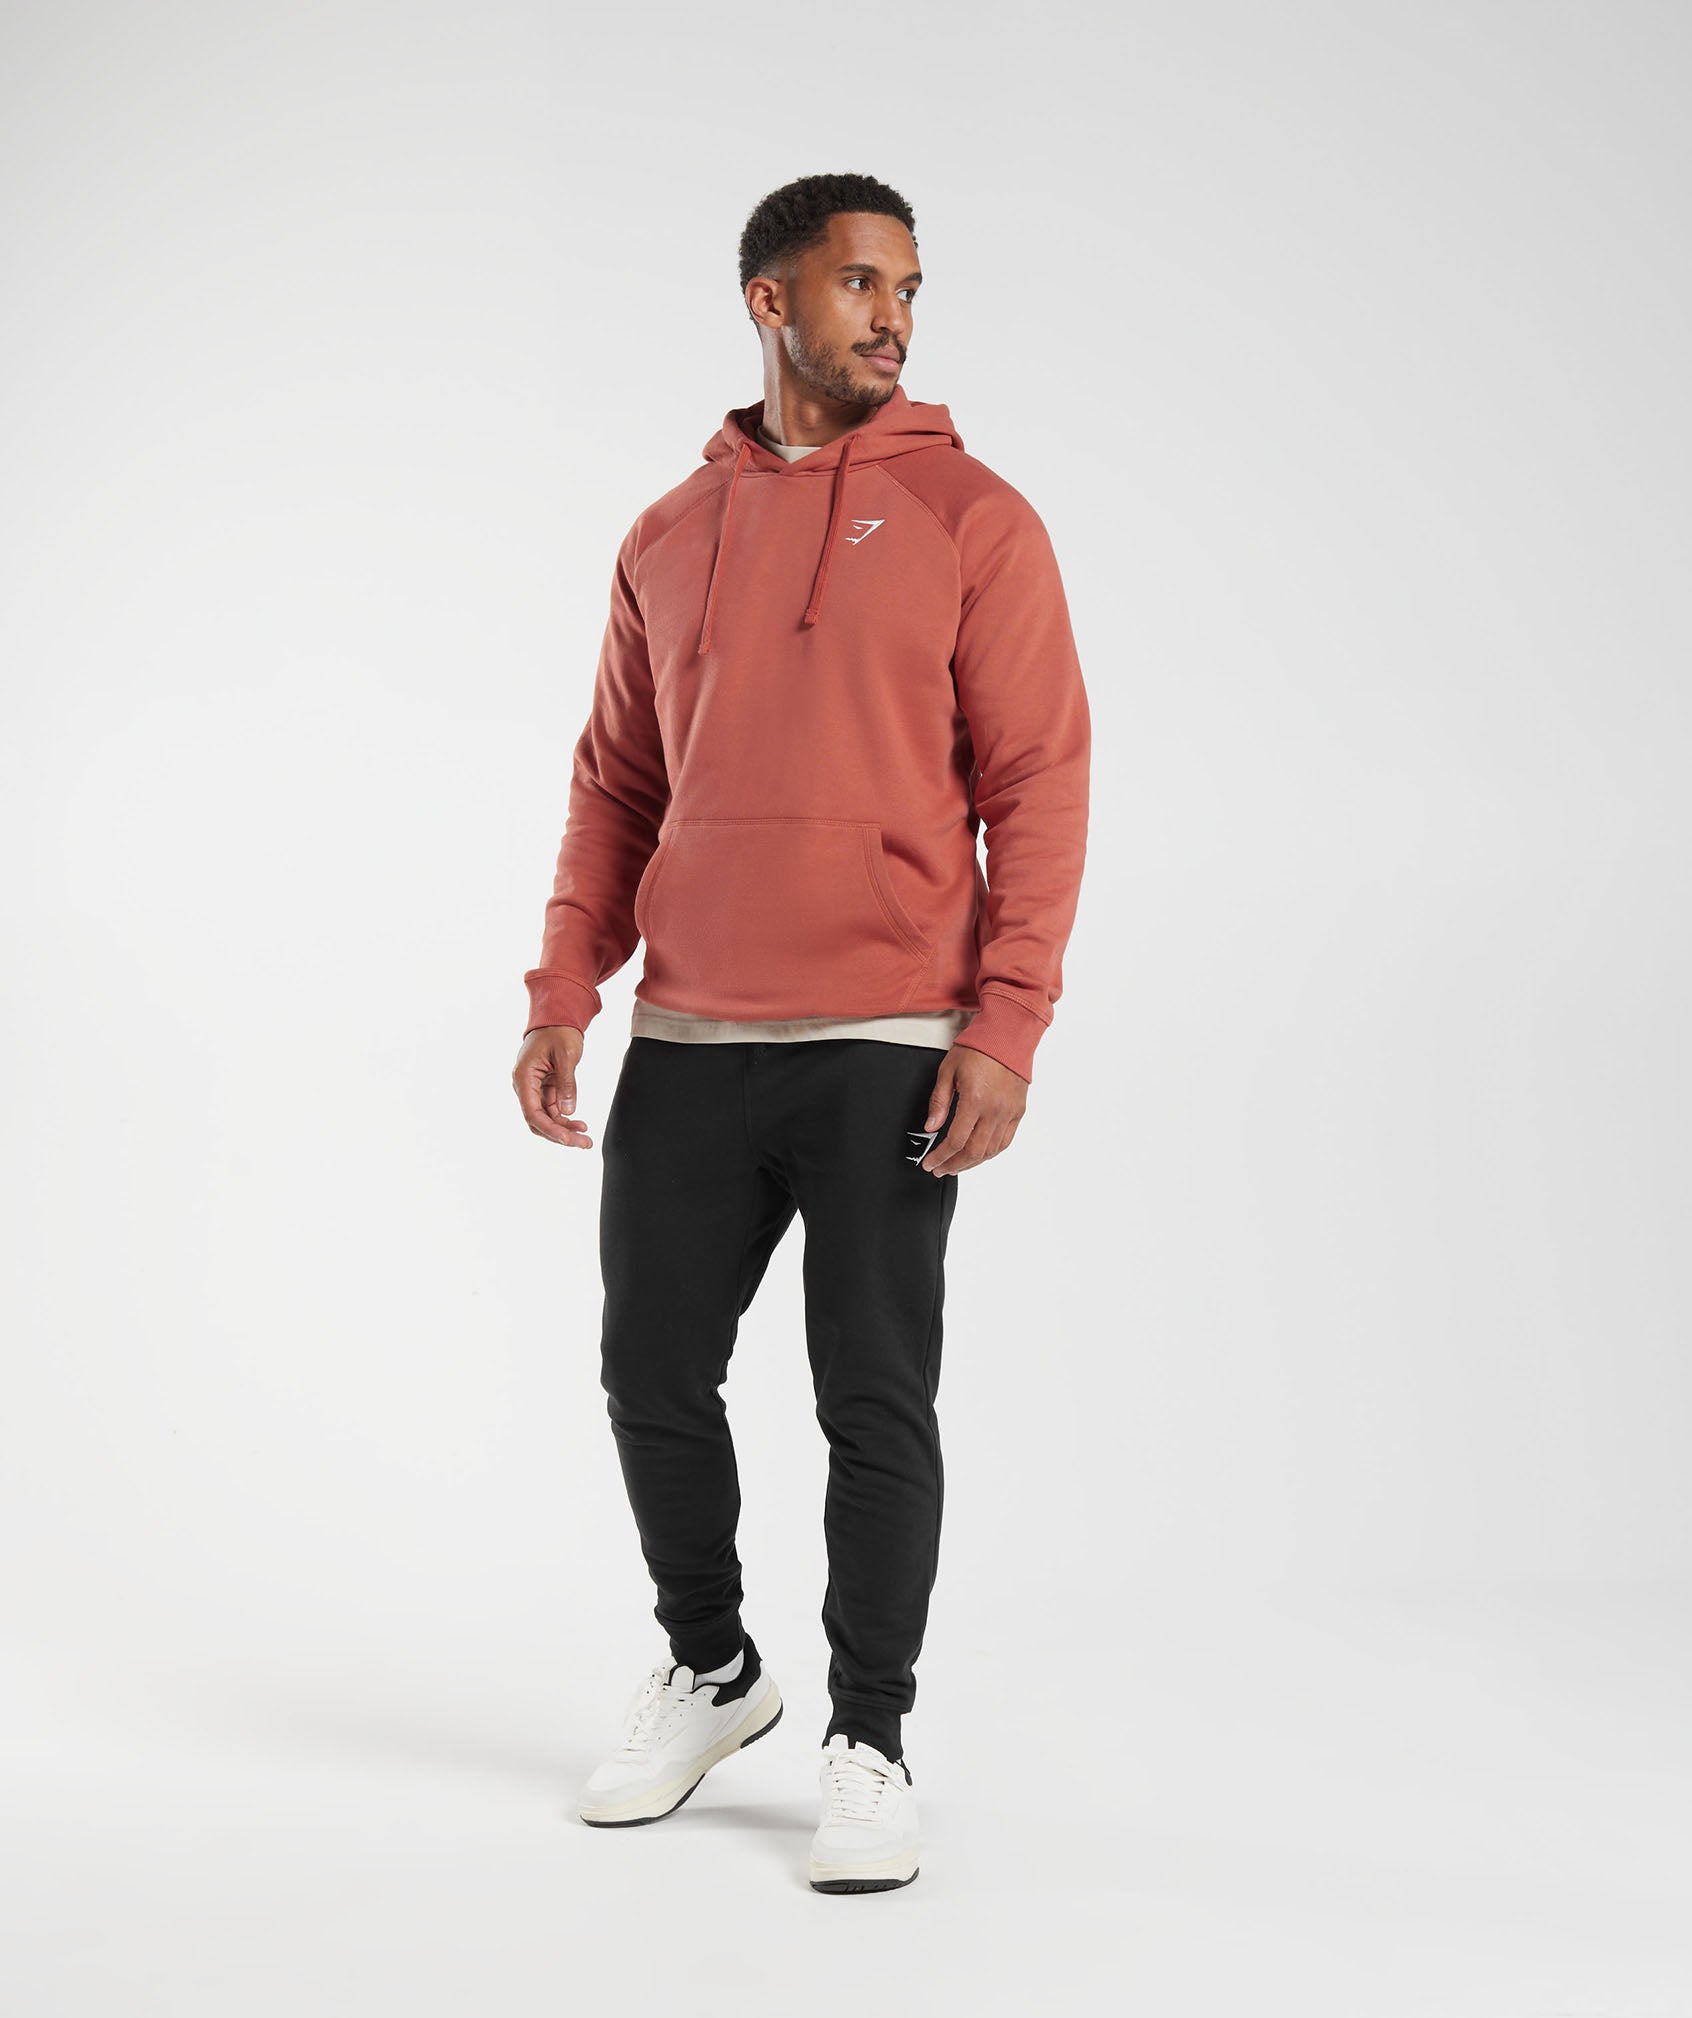 Crest Hoodie in Persimmon Red - view 4